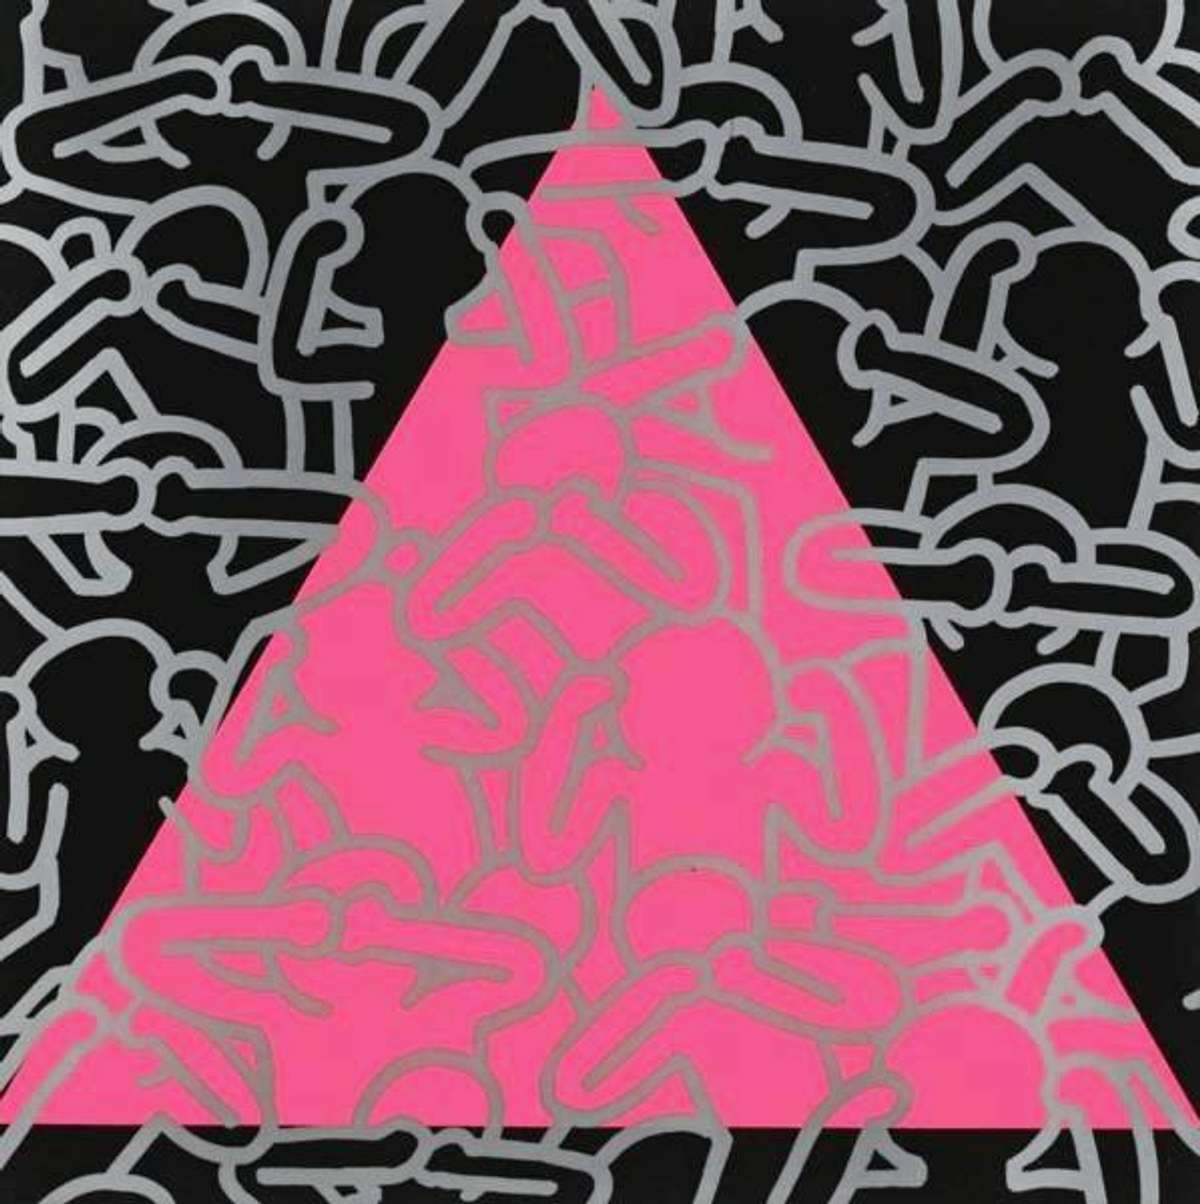 Keith Haring: The Blueprint of Social Activism